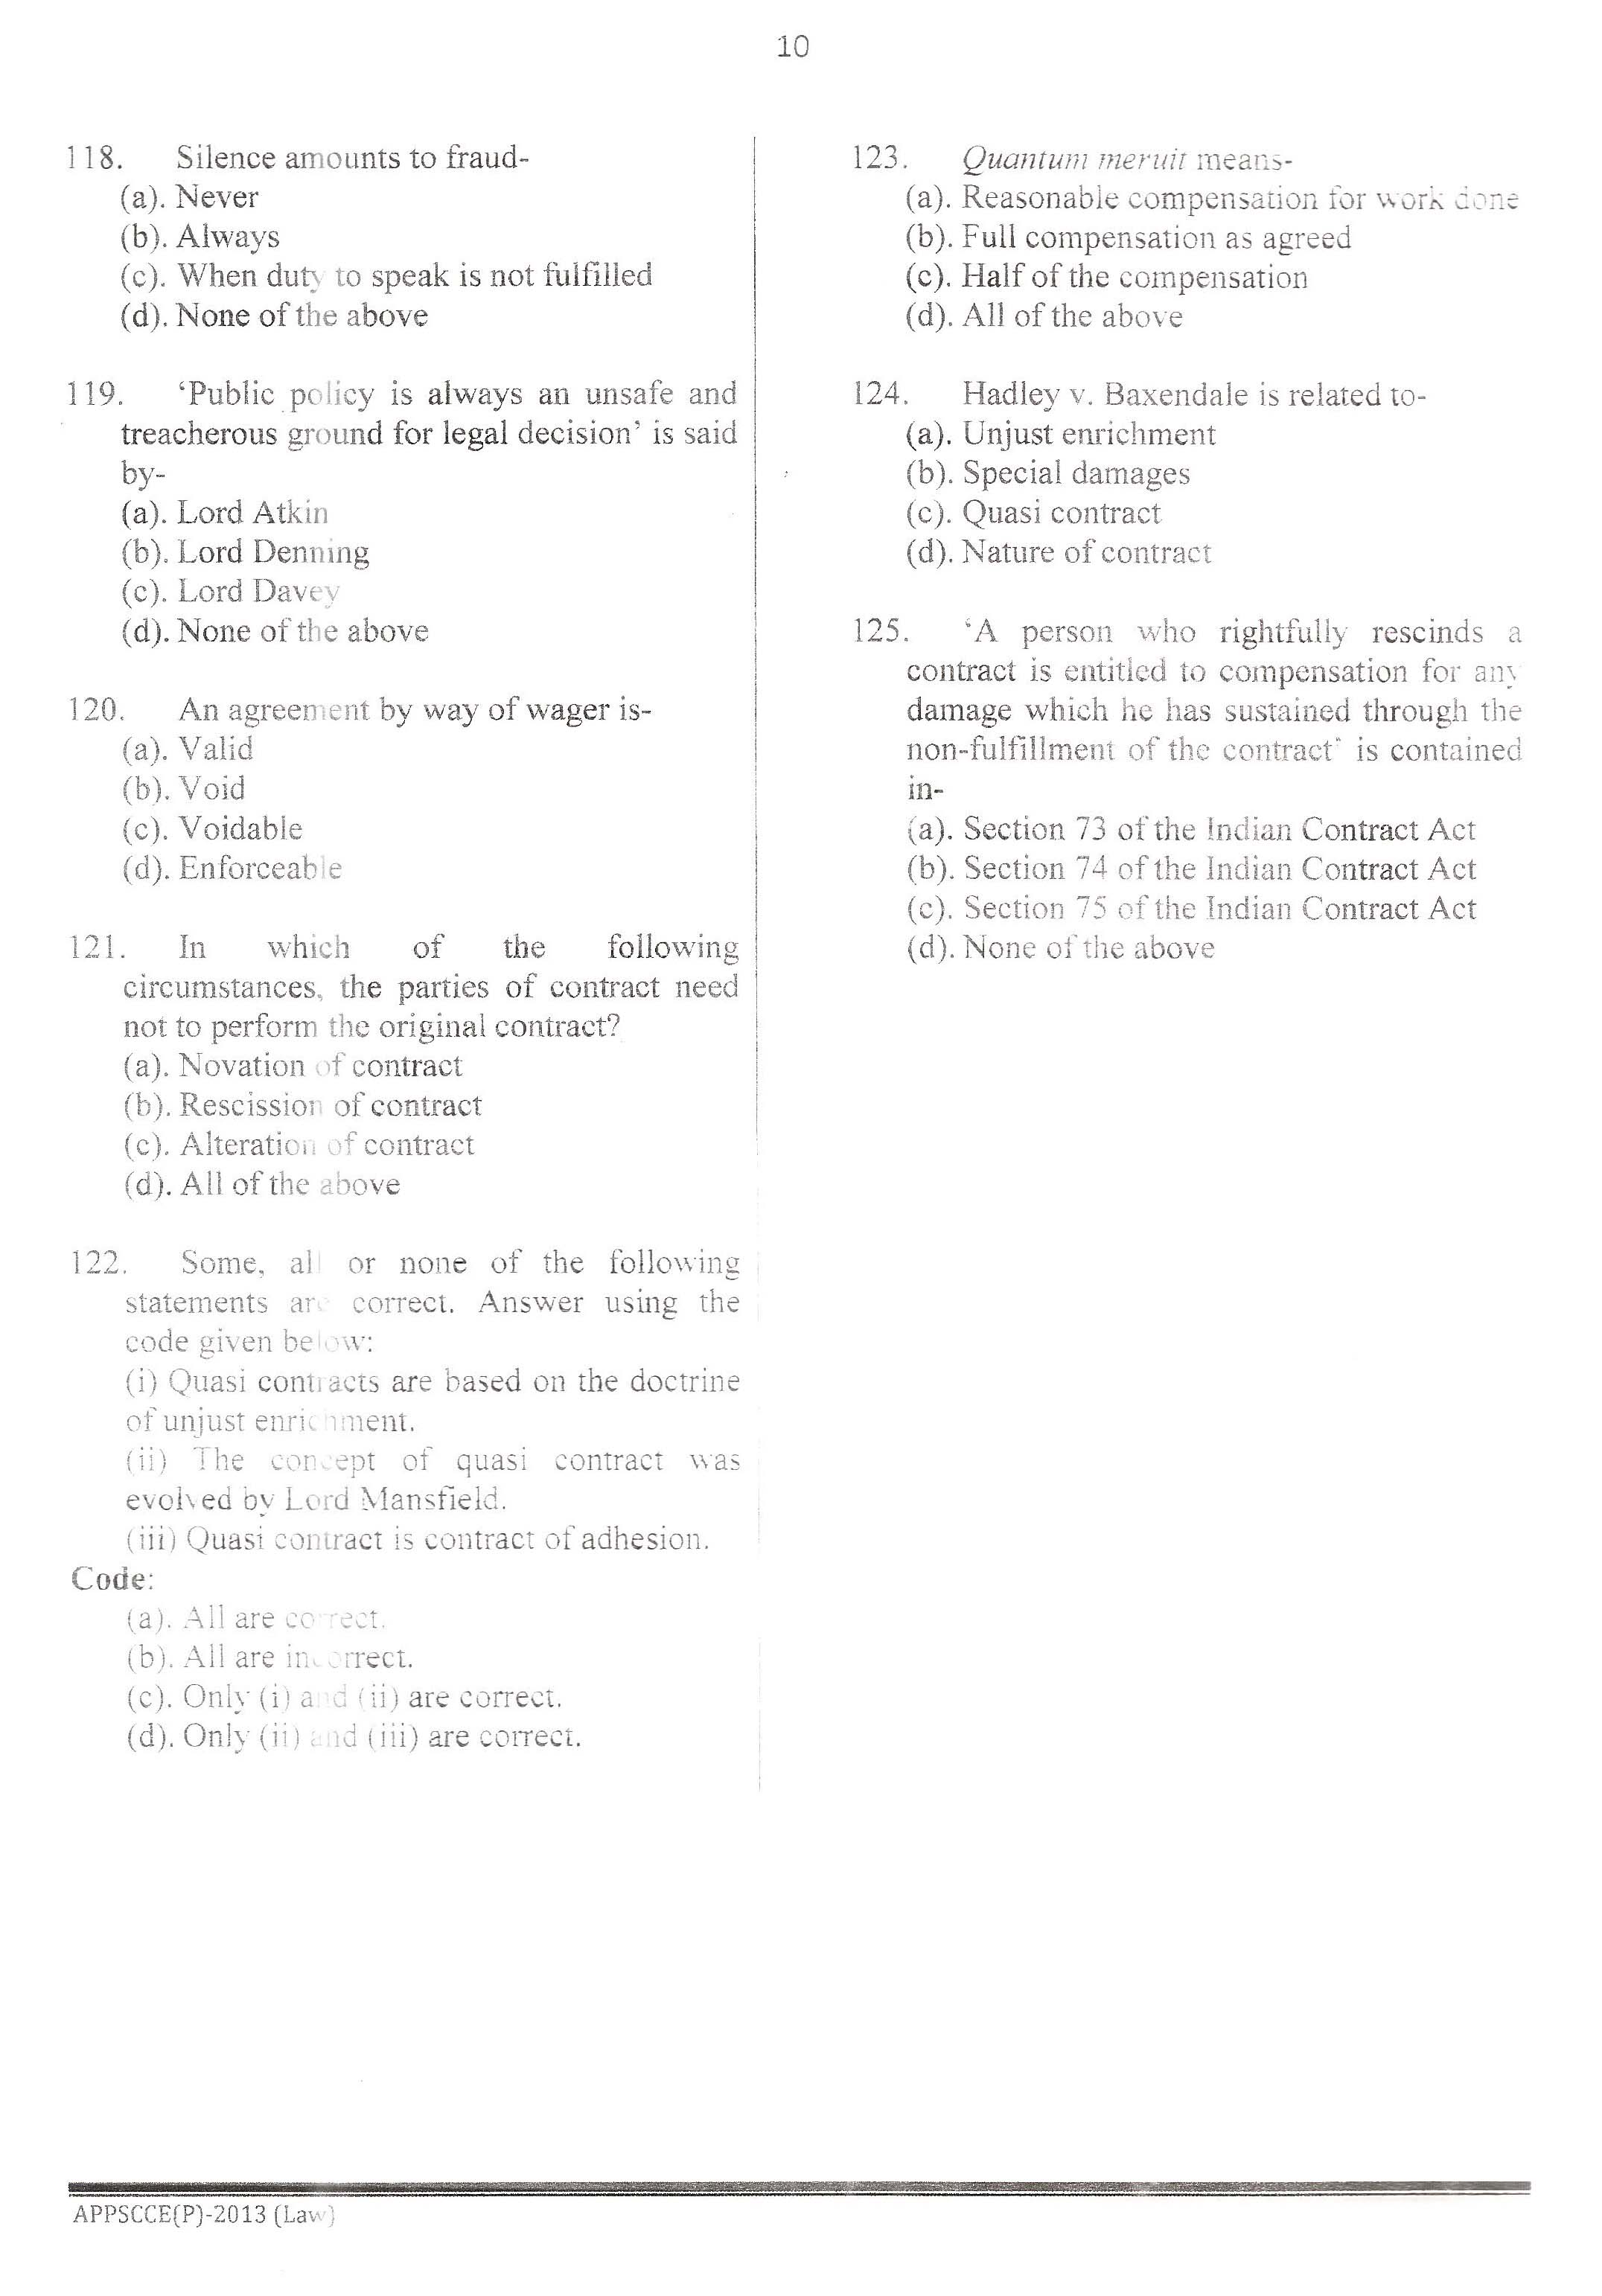 APPSC Combined Competitive Prelims Exam 2013 Law 11